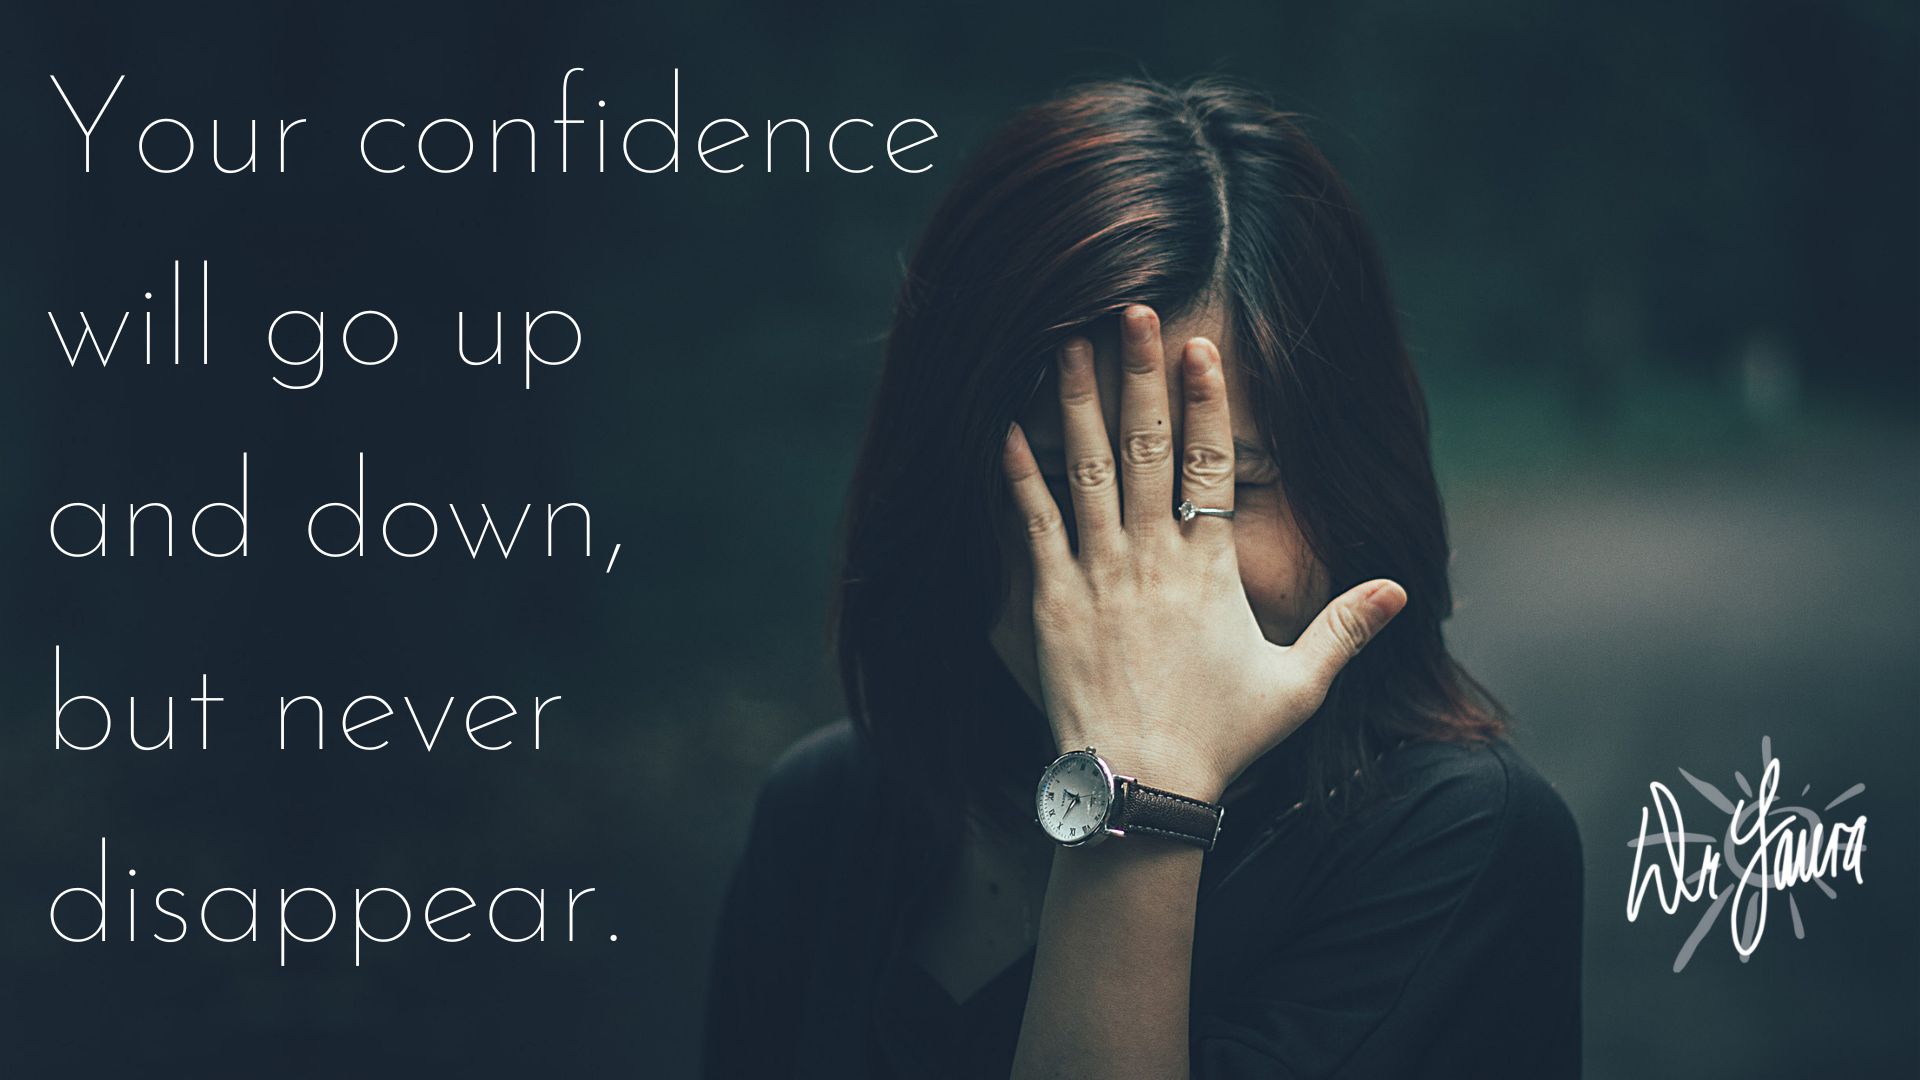 Your confidence will go up and down, but never disappear